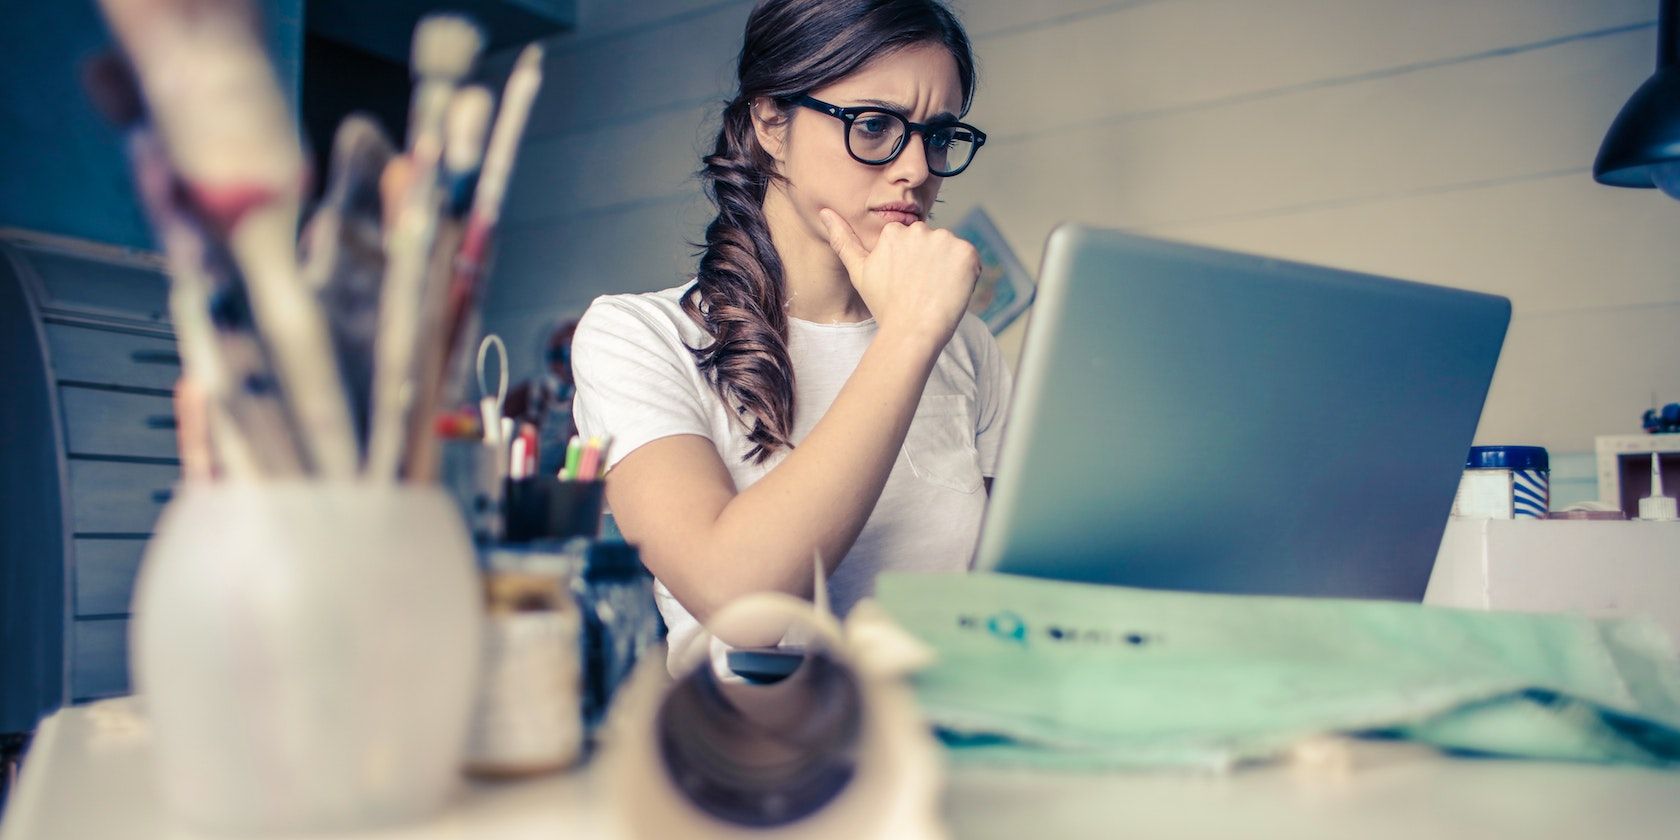 Photo of a woman staring helplessly into a laptop.